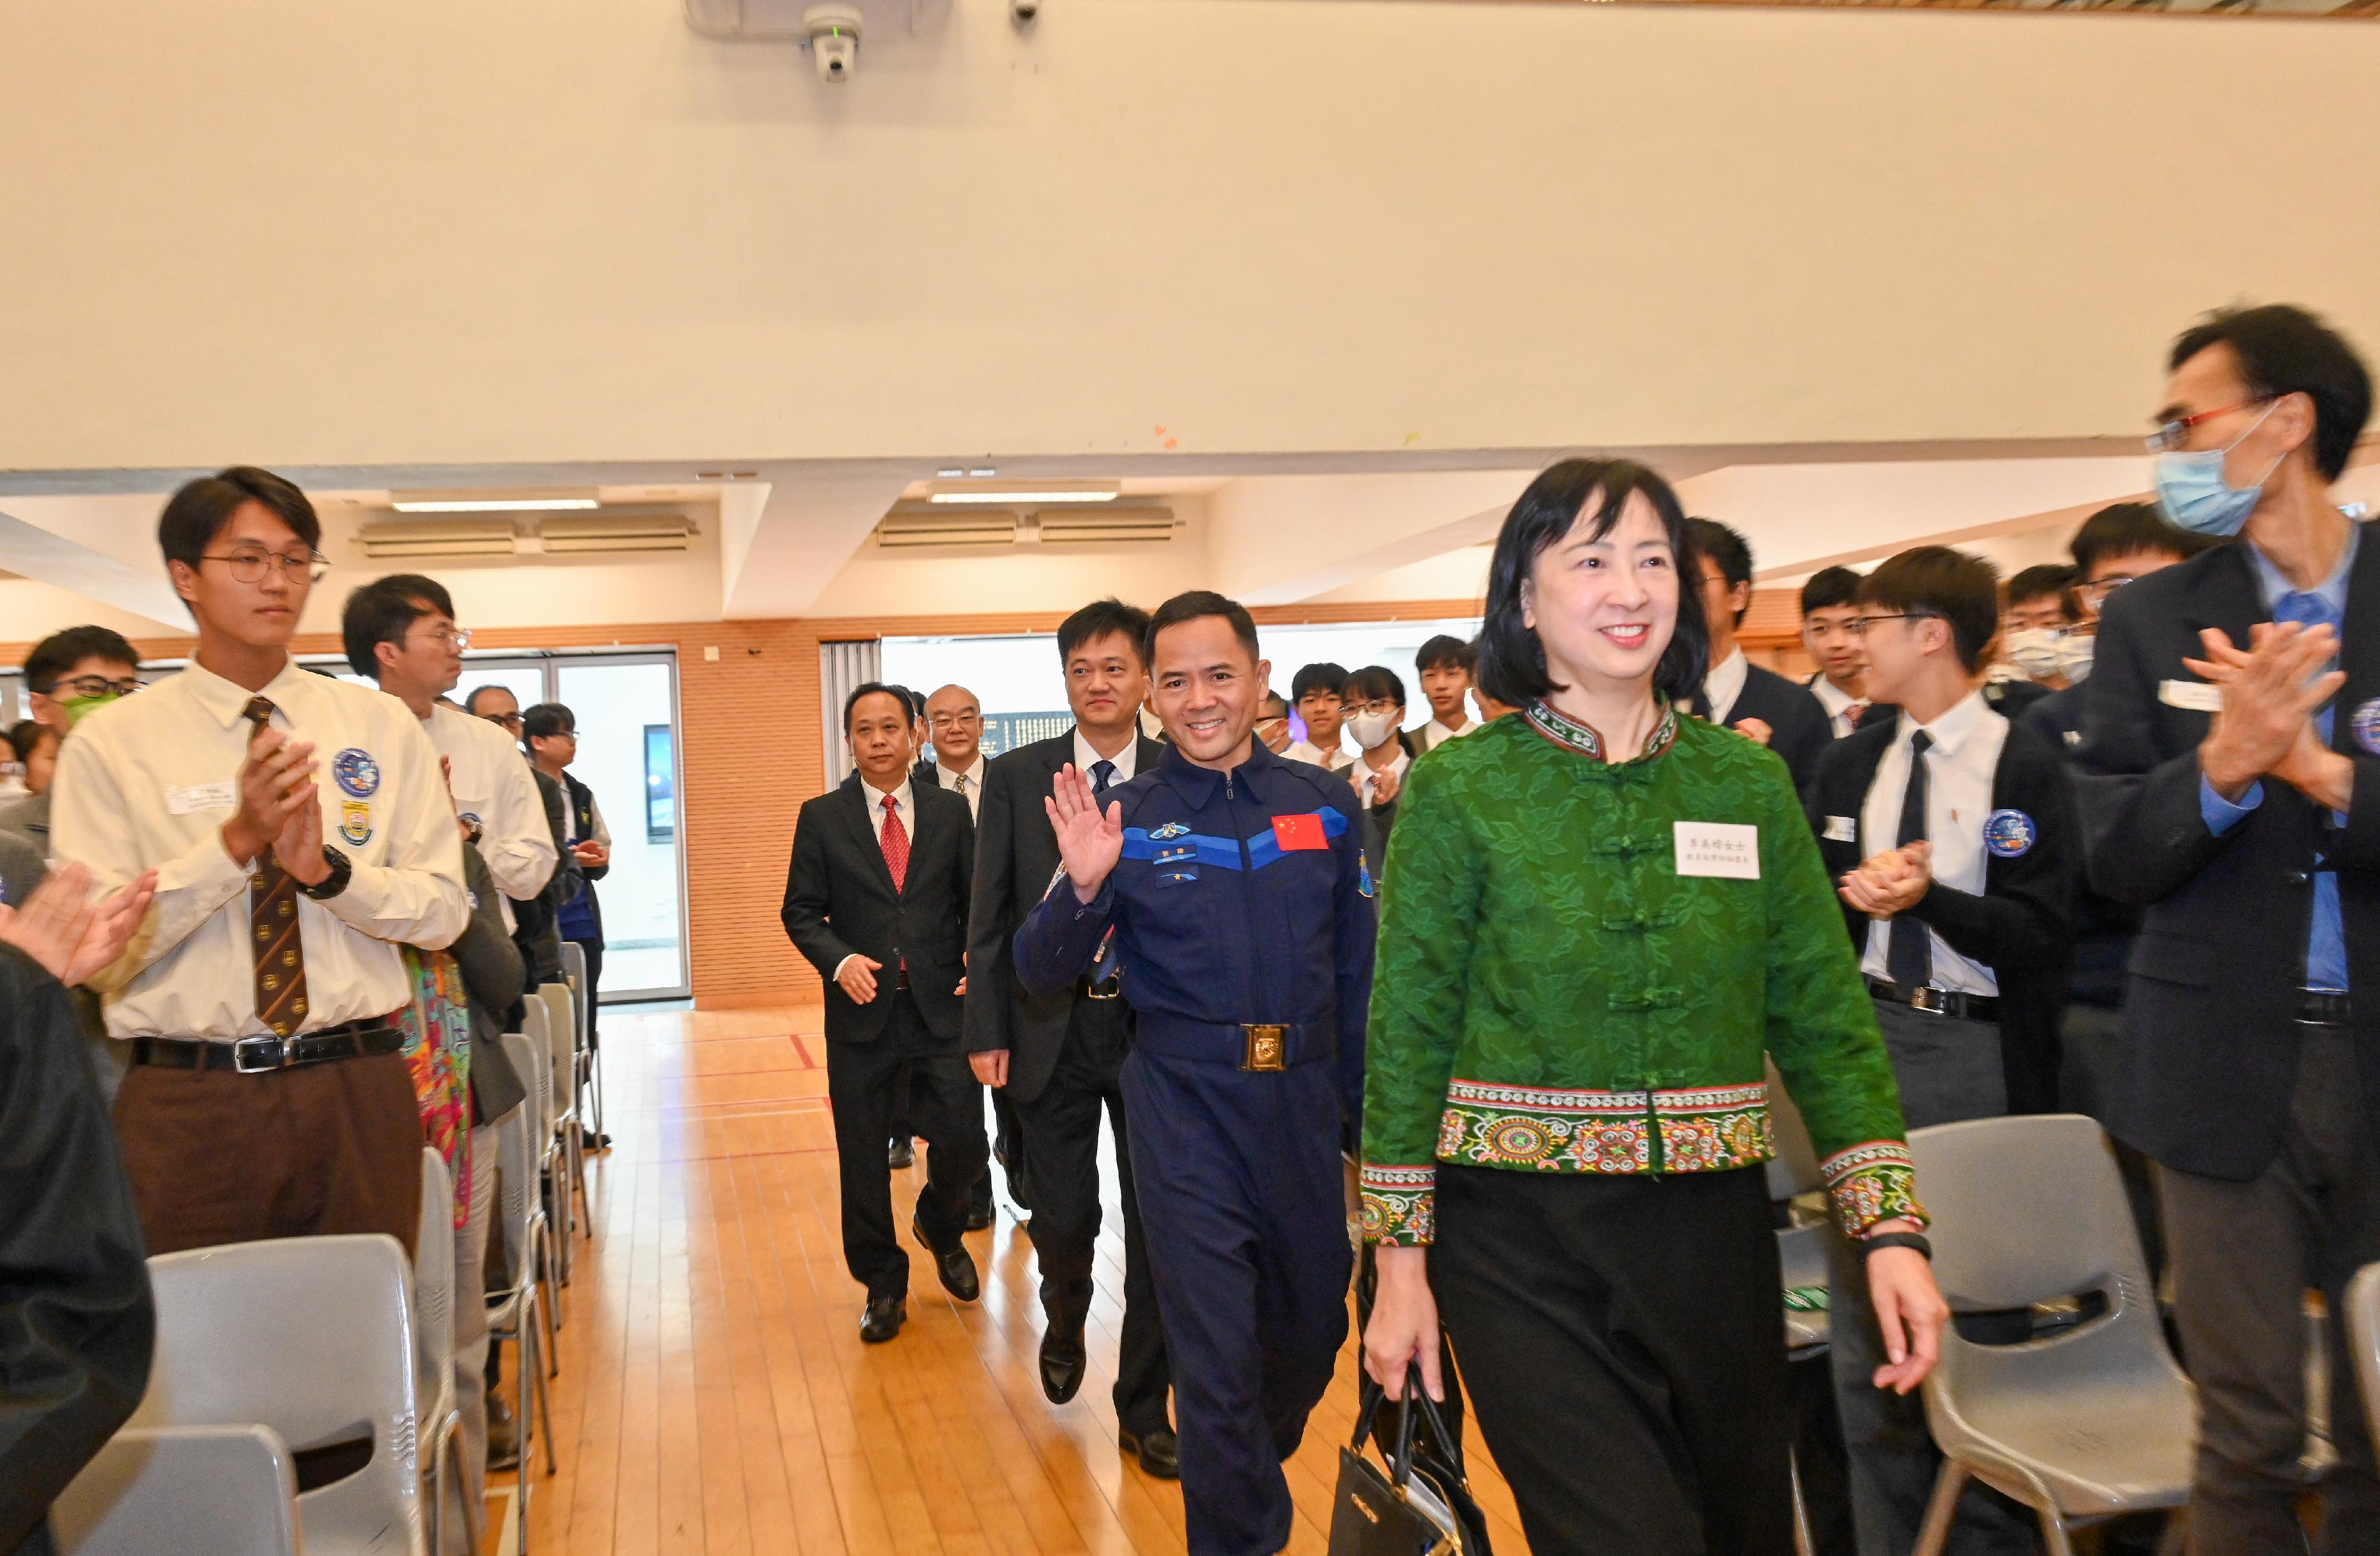 The China Manned Space delegation continued their visit in Hong Kong today (November 29). Photo shows (from third right) the Permanent Secretary for Education, Ms Michelle Li; Shenzhou-15 astronaut Mr Zhang Lu, together with the delegation members, attending a dialogue session with students at Hong Kong Baptist University Affiliated School Wong Kam Fai Secondary and Primary School (Secondary Division).



